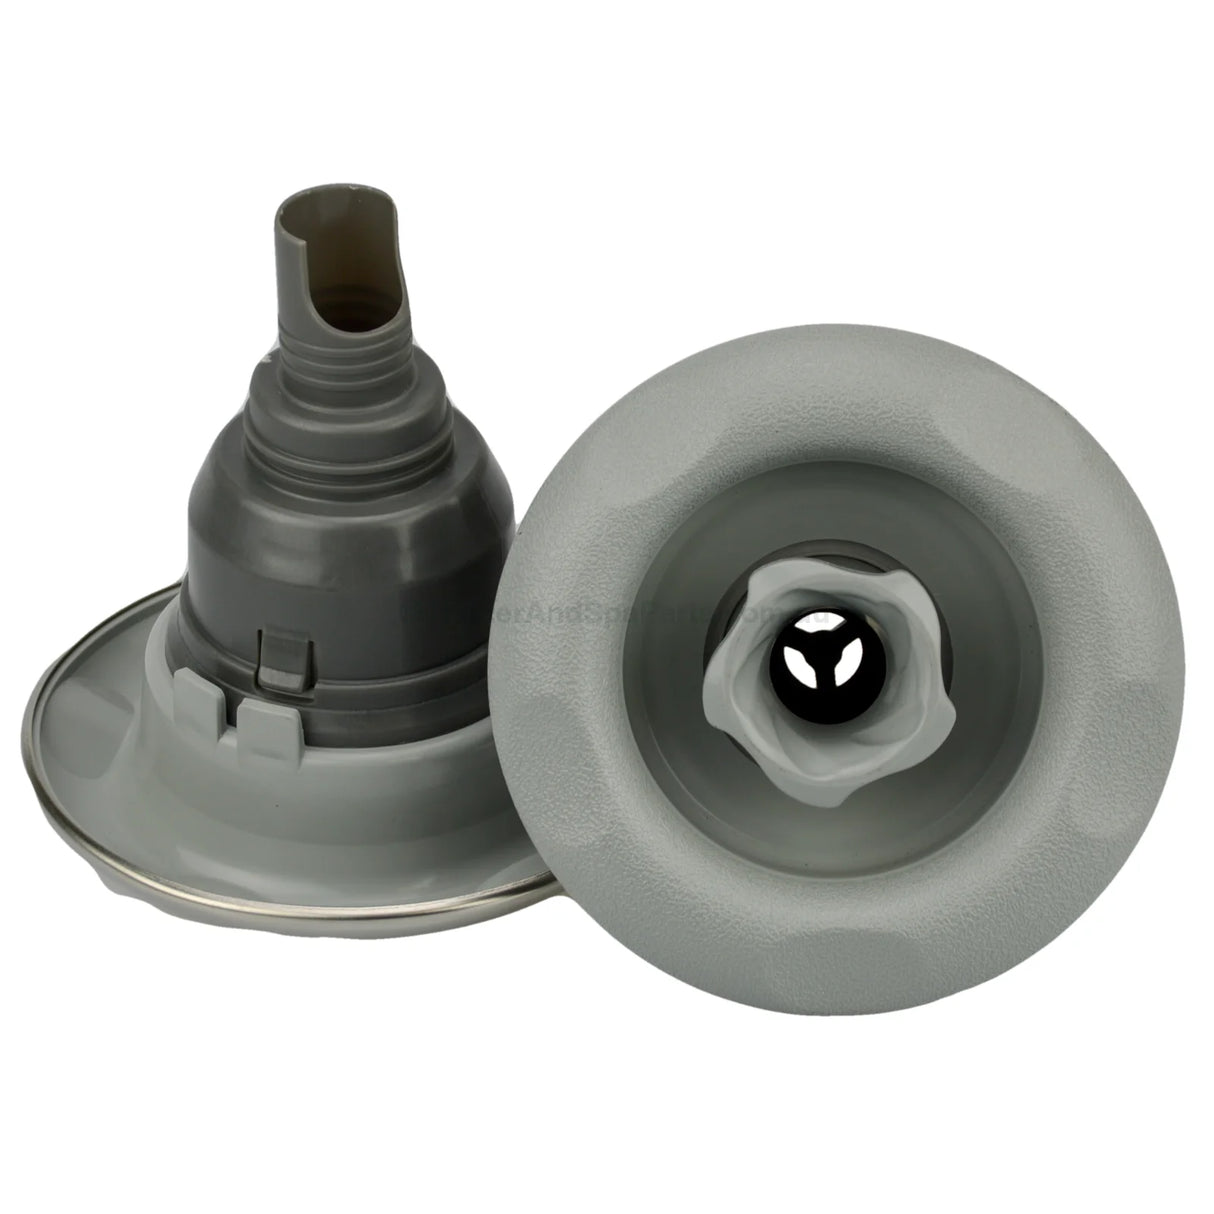 Obsolete - Edgetec Exhilarator 125 Jet Internal - Directional - Grey - 125mm - Obsolete - Heater and Spa Parts